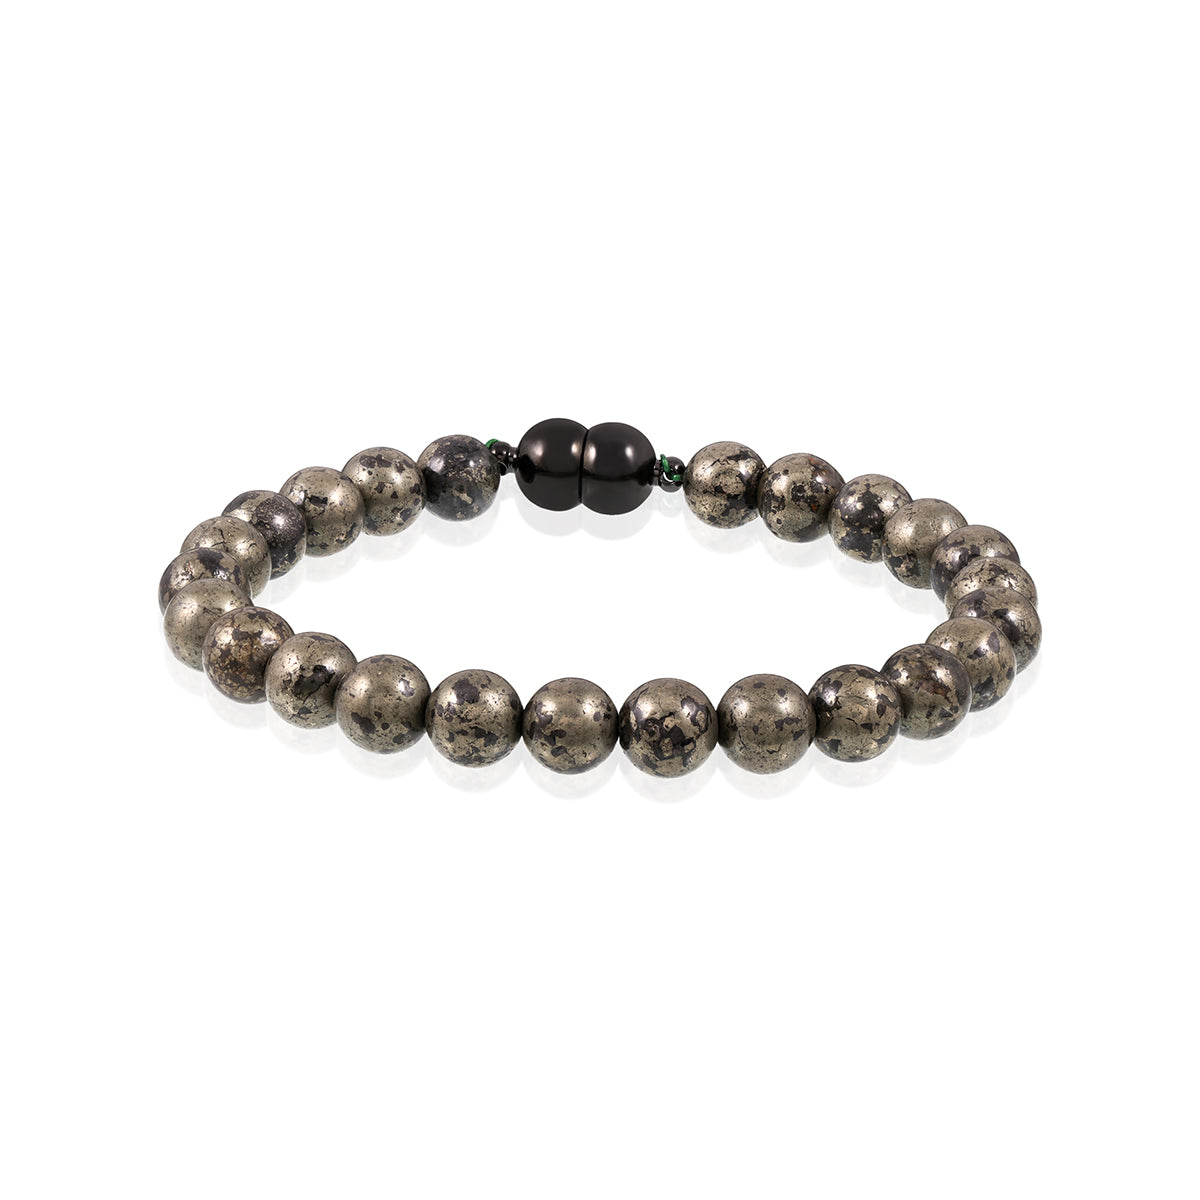 Pyrite Beads Bracelet with Magnetic Lock